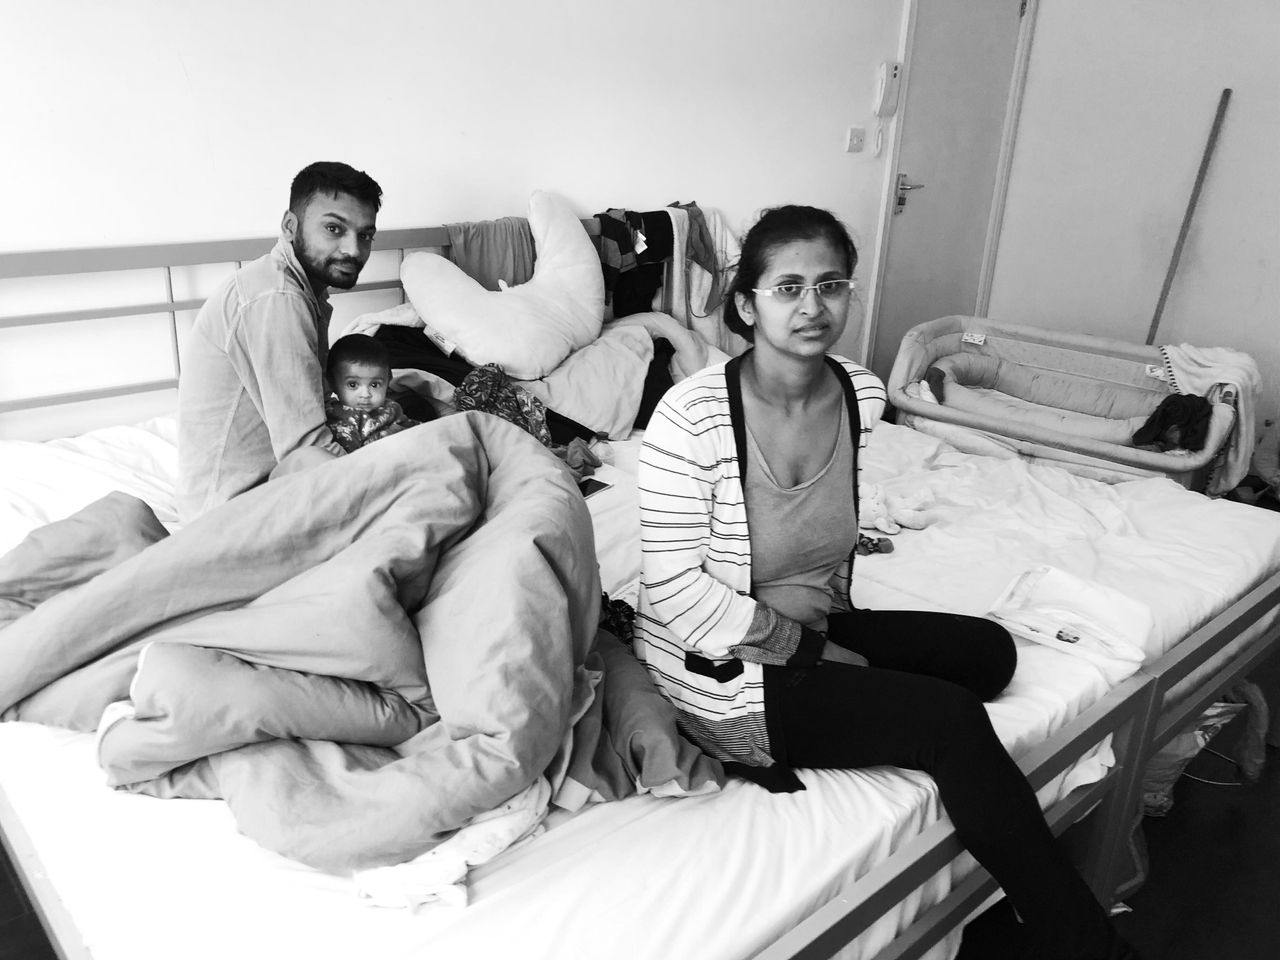 Jankhana (right) and Milan with their daughter Anaaya, on the beds in the room where they lived.